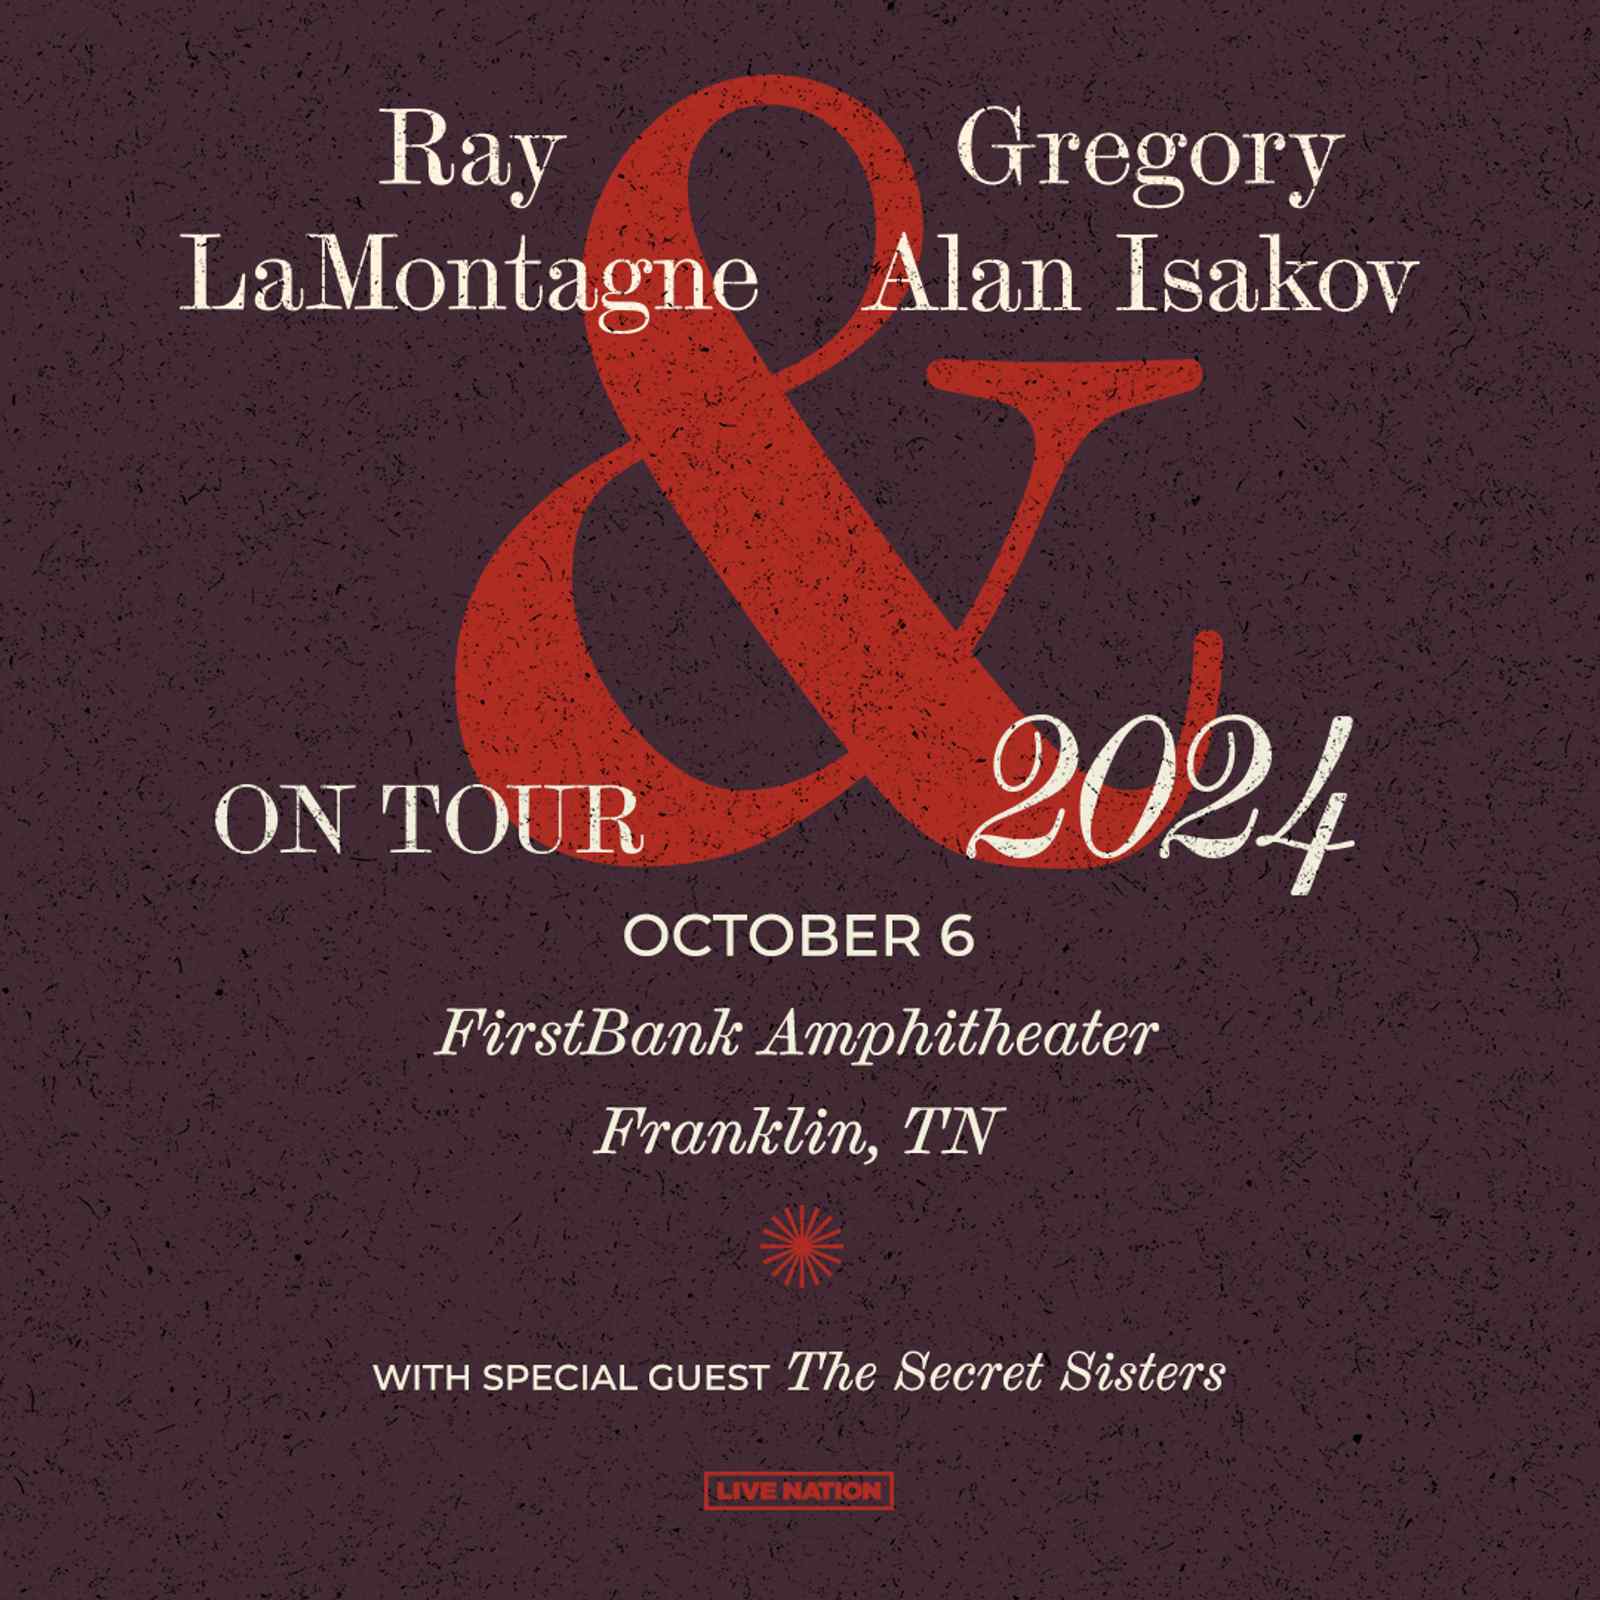 RAY LAMONTAGNE AND GREGORY ALAN ISAKOV ANNOUNCE FALL TOUR TOGETHER